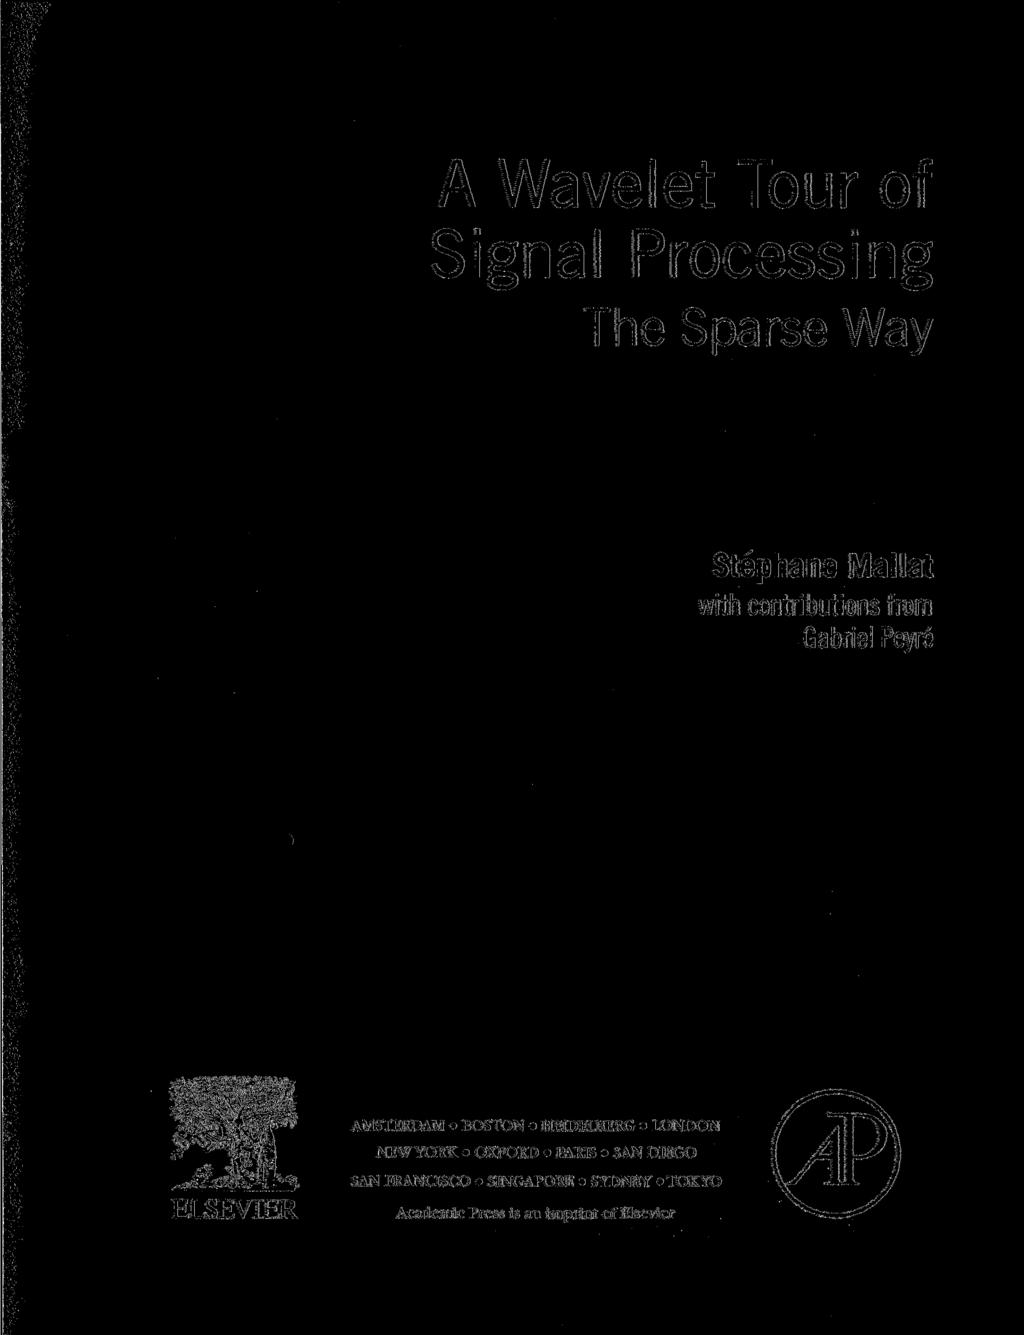 A Wavelet Tour of Signal Processing The Sparse Way Stephane Mallat with contributions from Gabriel Peyre AMSTERDAM BOSTON